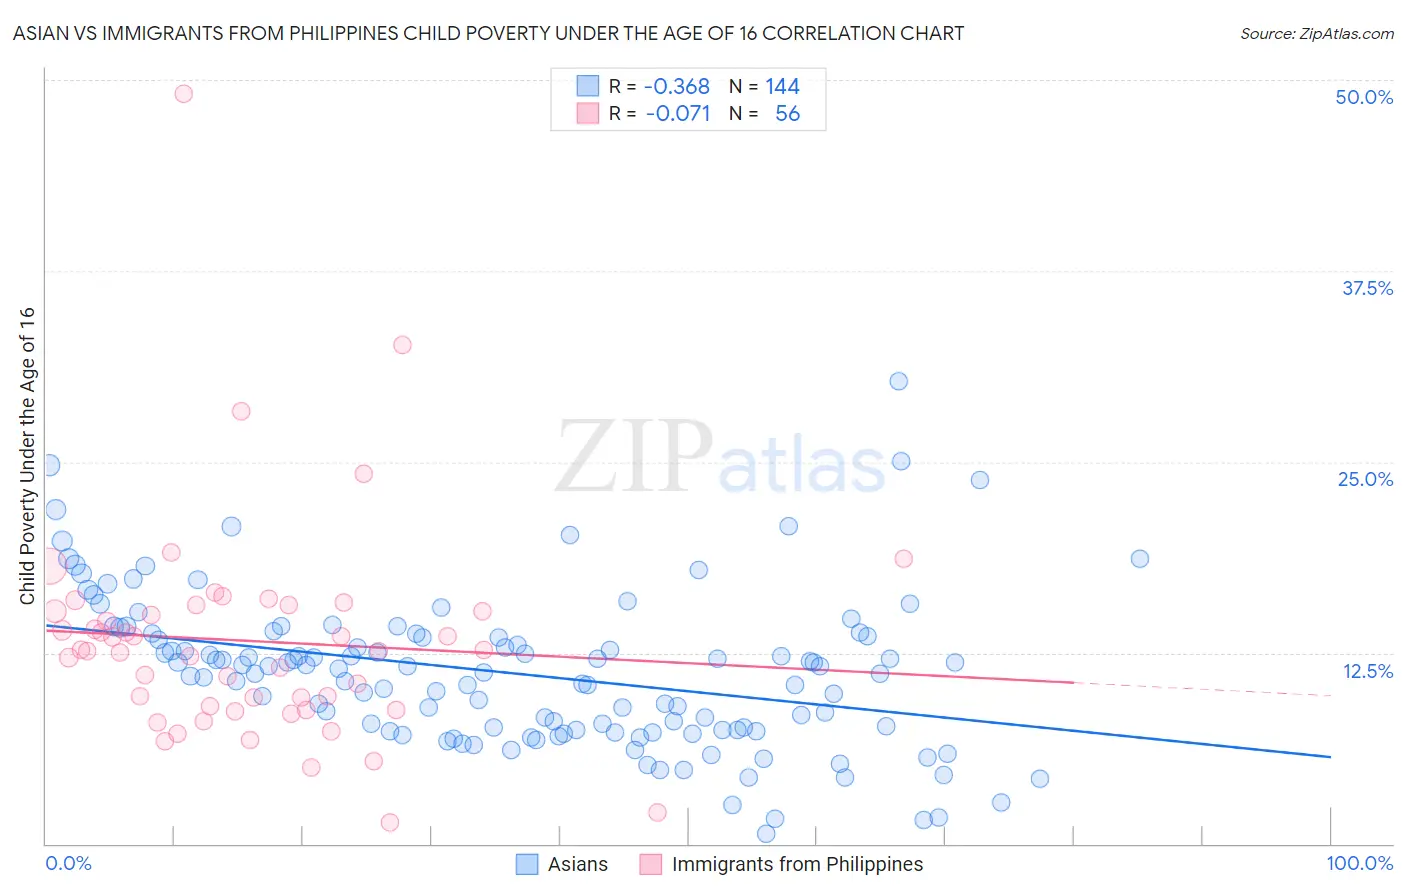 Asian vs Immigrants from Philippines Child Poverty Under the Age of 16